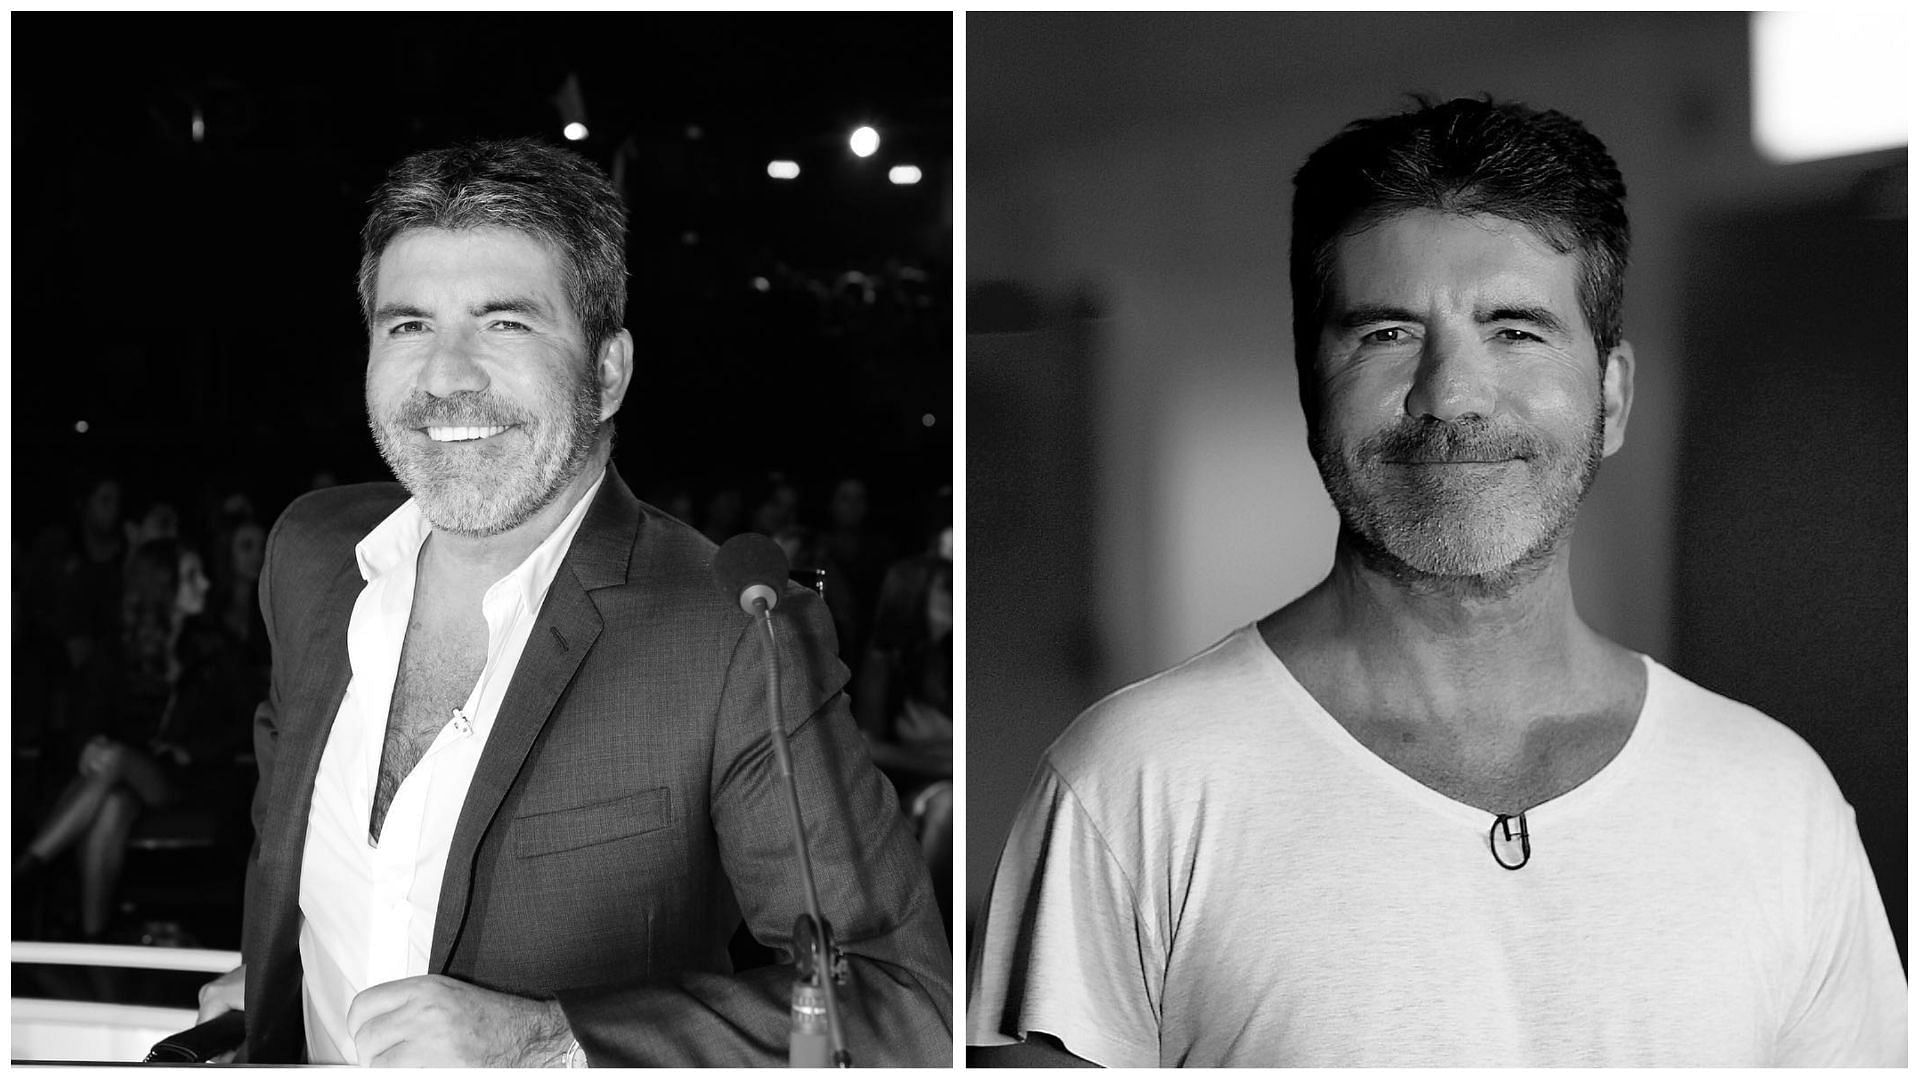 Simon started a fitness and wellness regimen, and as a result, has shed 60lbs. (Image via Instagram @simoncowell)